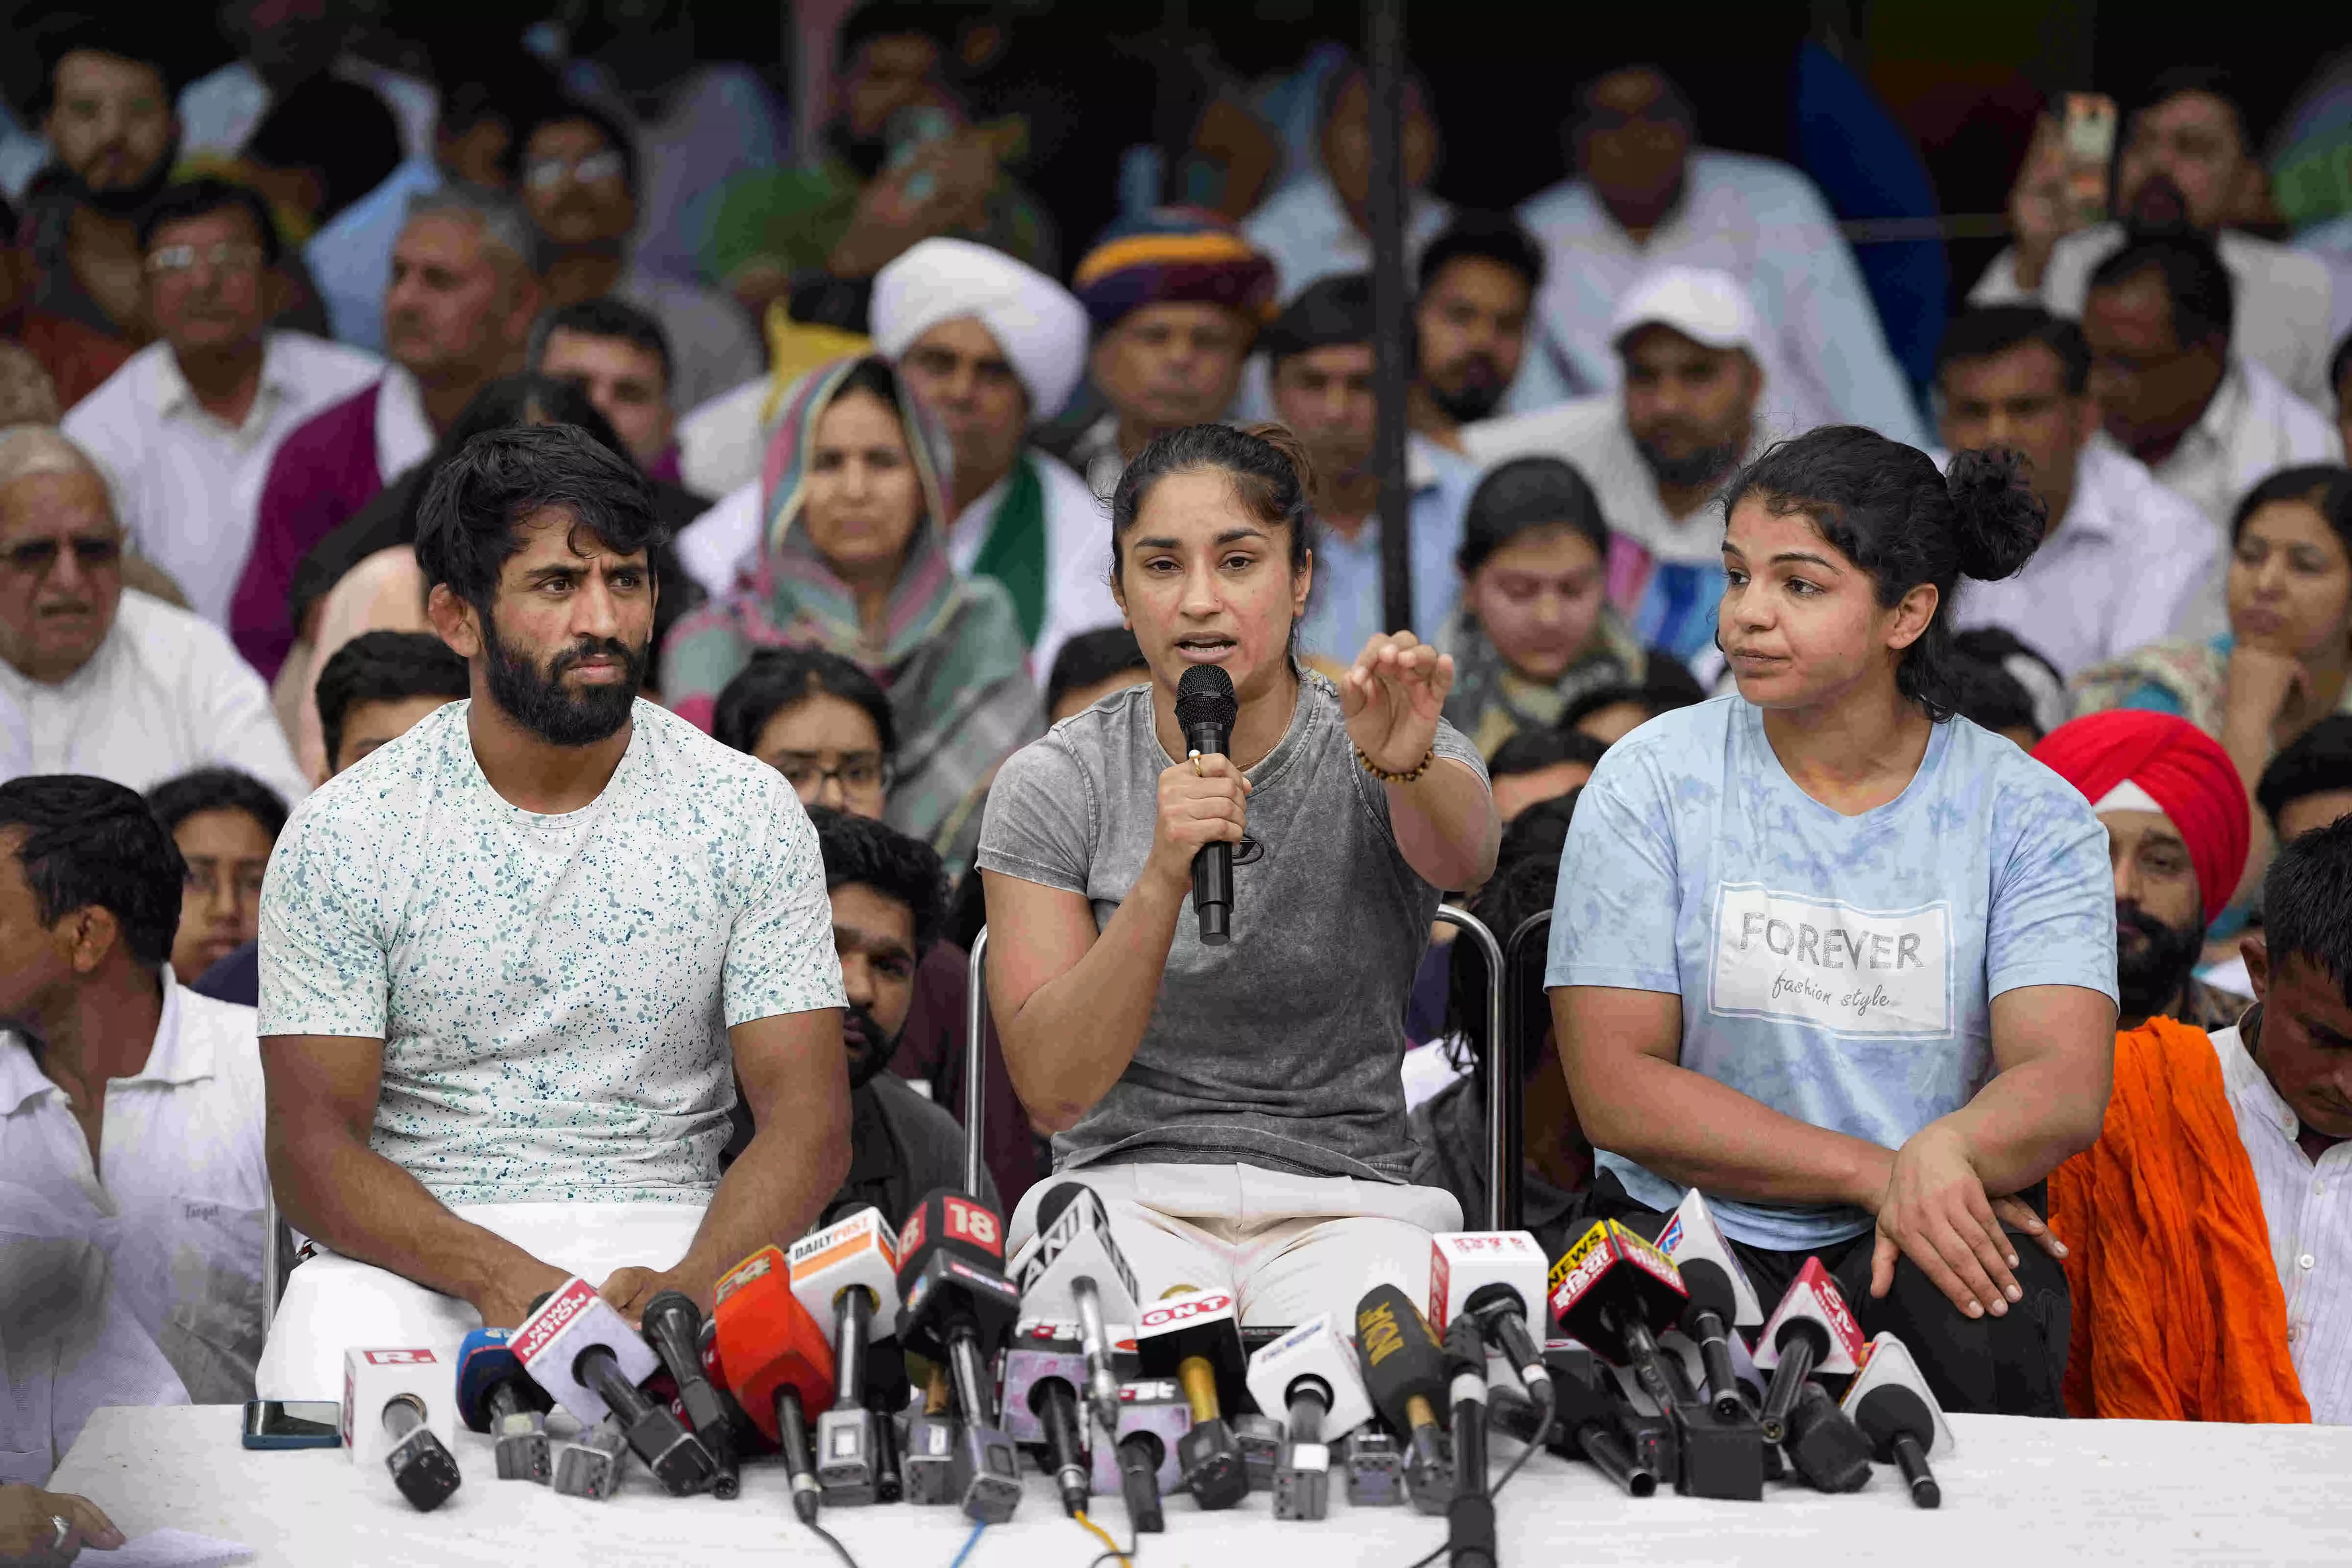 Some people trying to take our protest   in different direction, say wrestlers